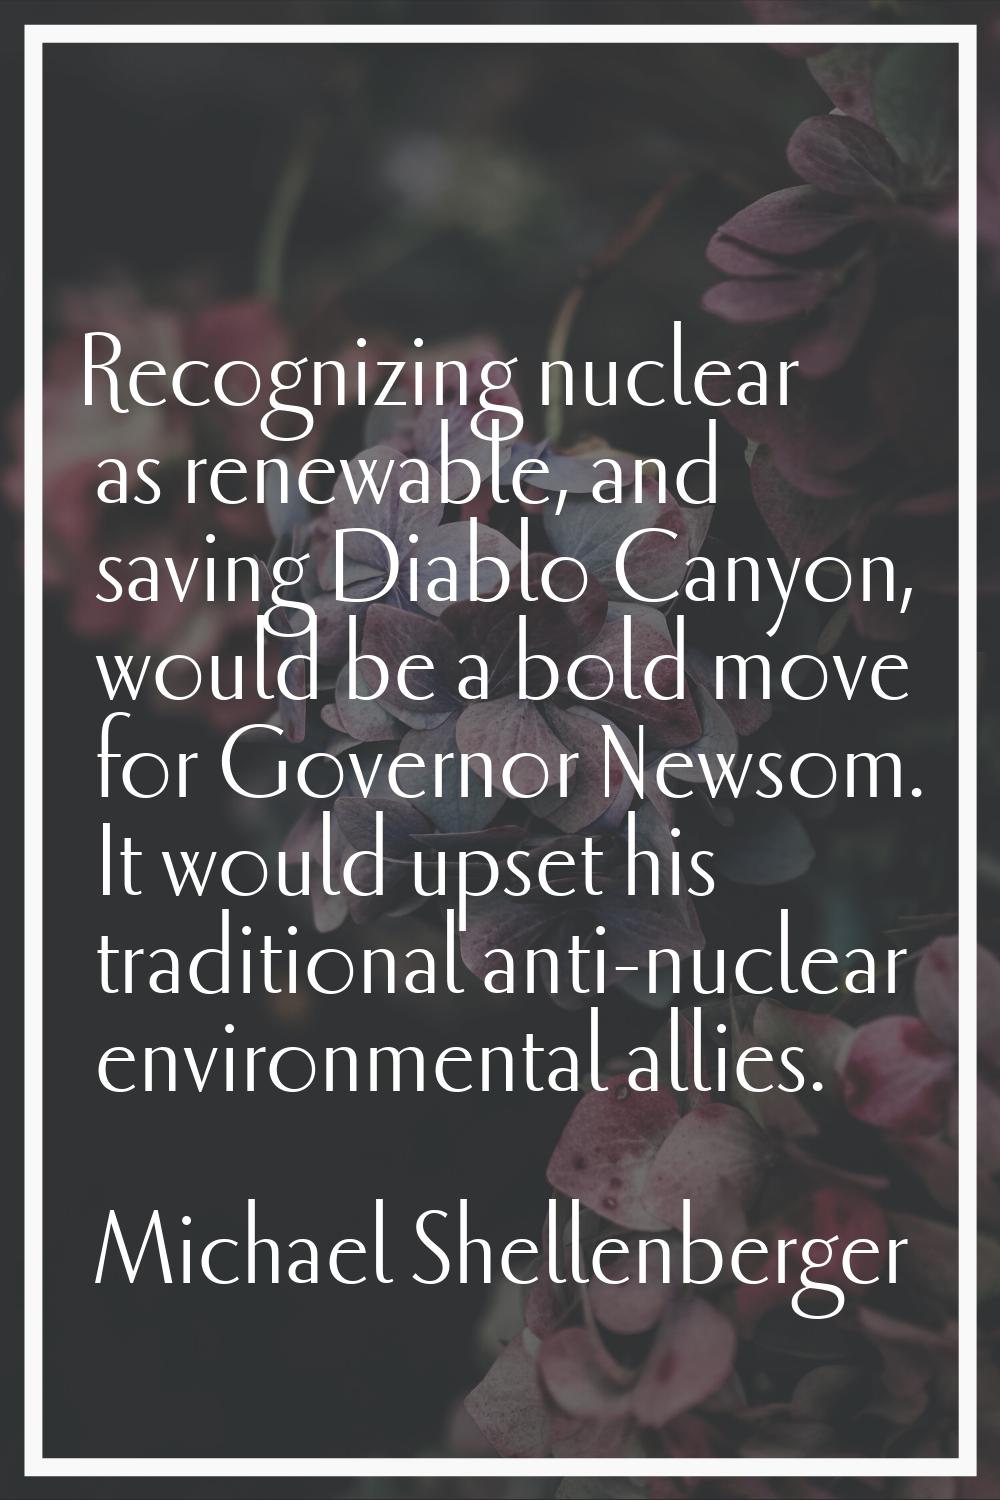 Recognizing nuclear as renewable, and saving Diablo Canyon, would be a bold move for Governor Newso